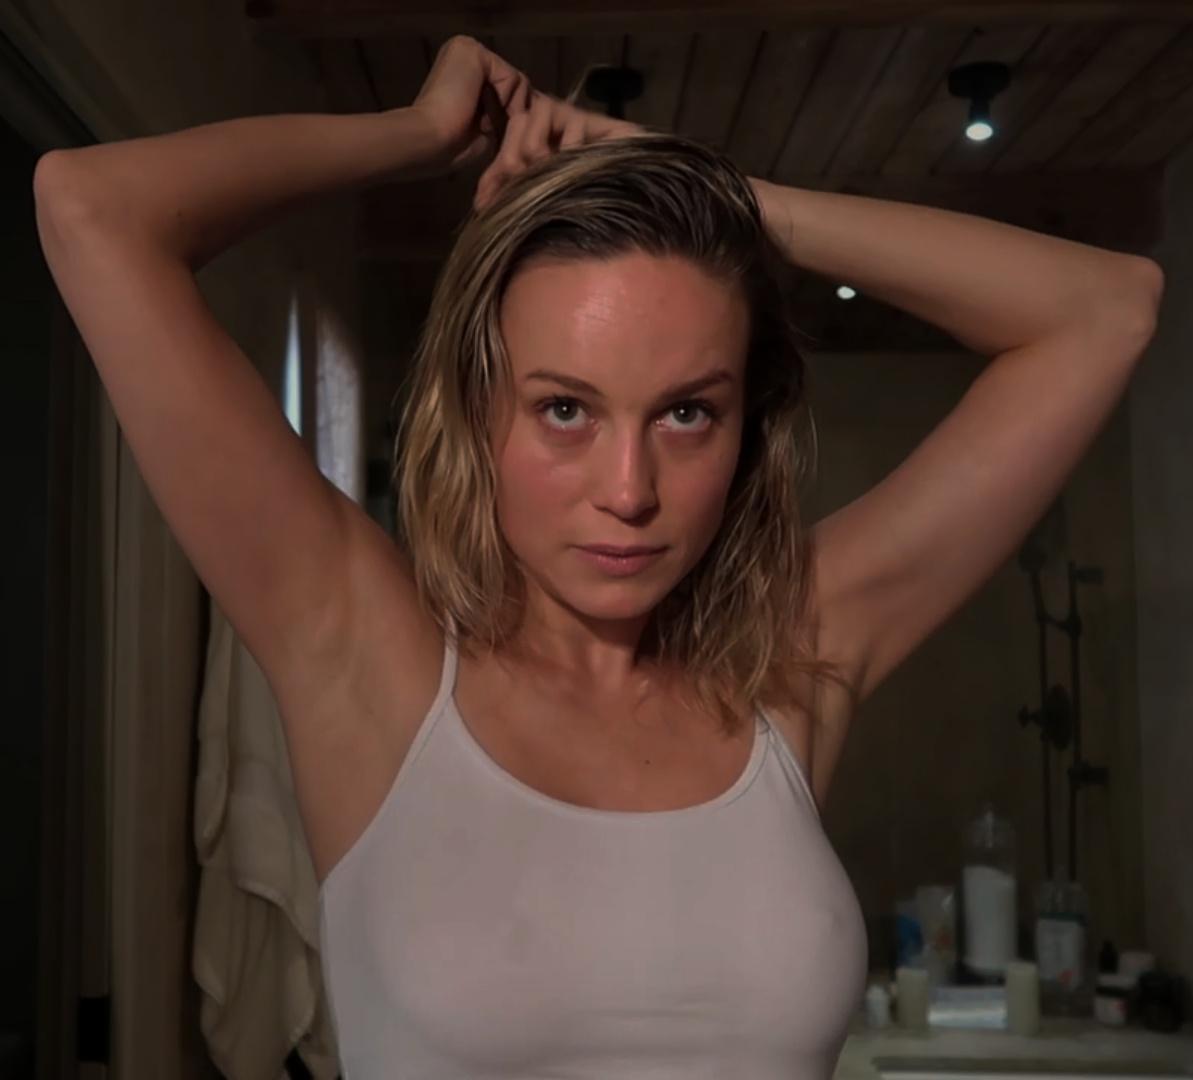 Brie Larson like this bound with her hands tied behind